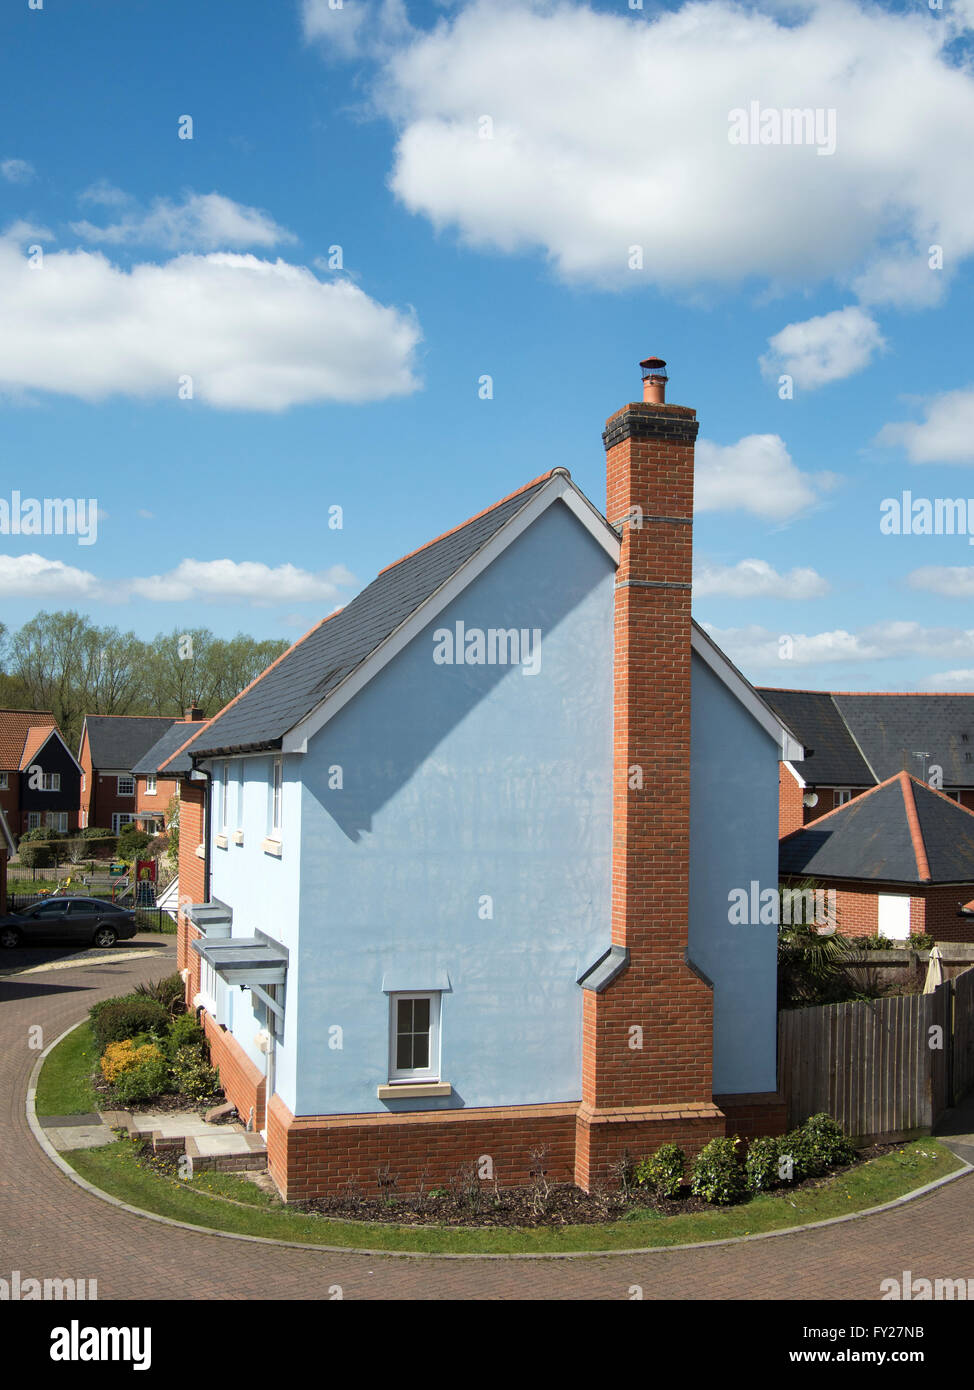 The exterior of a blue-walled British house with chimney. Stock Photo